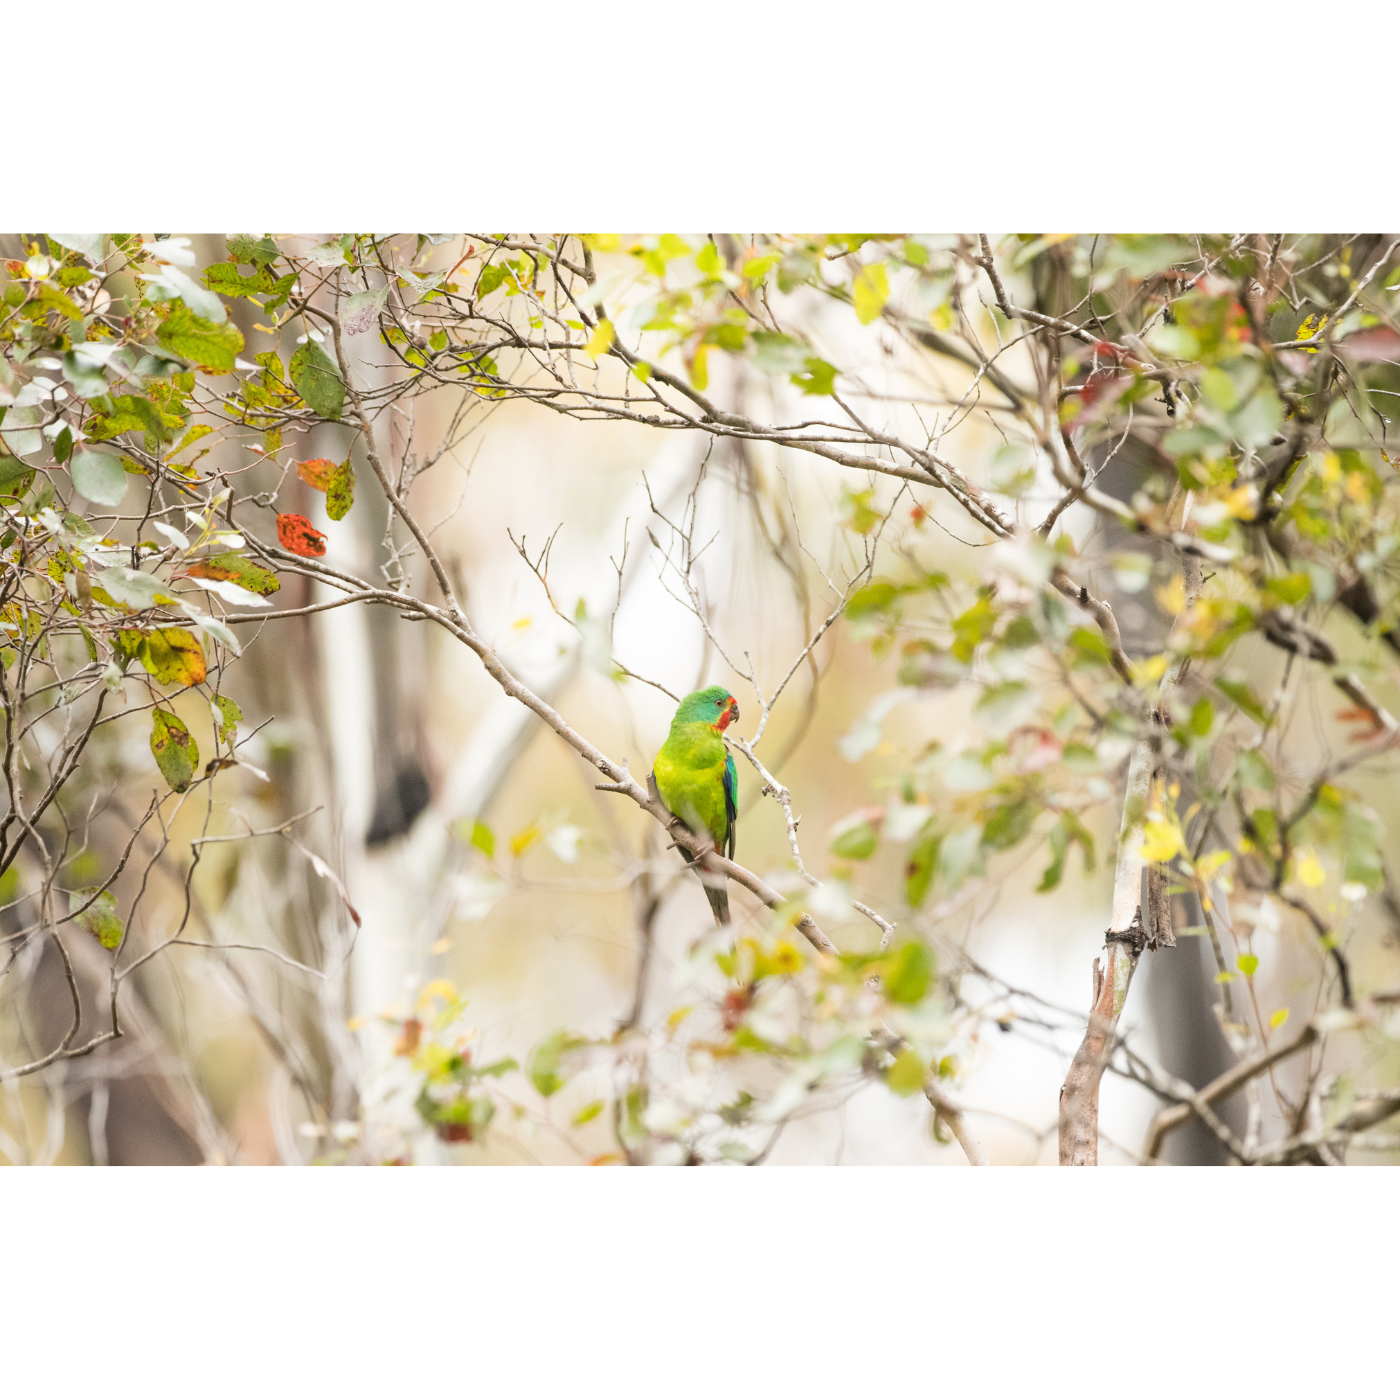 Antoine Chretien - Consideration for the Swift Parrots, the other beings and the forest.